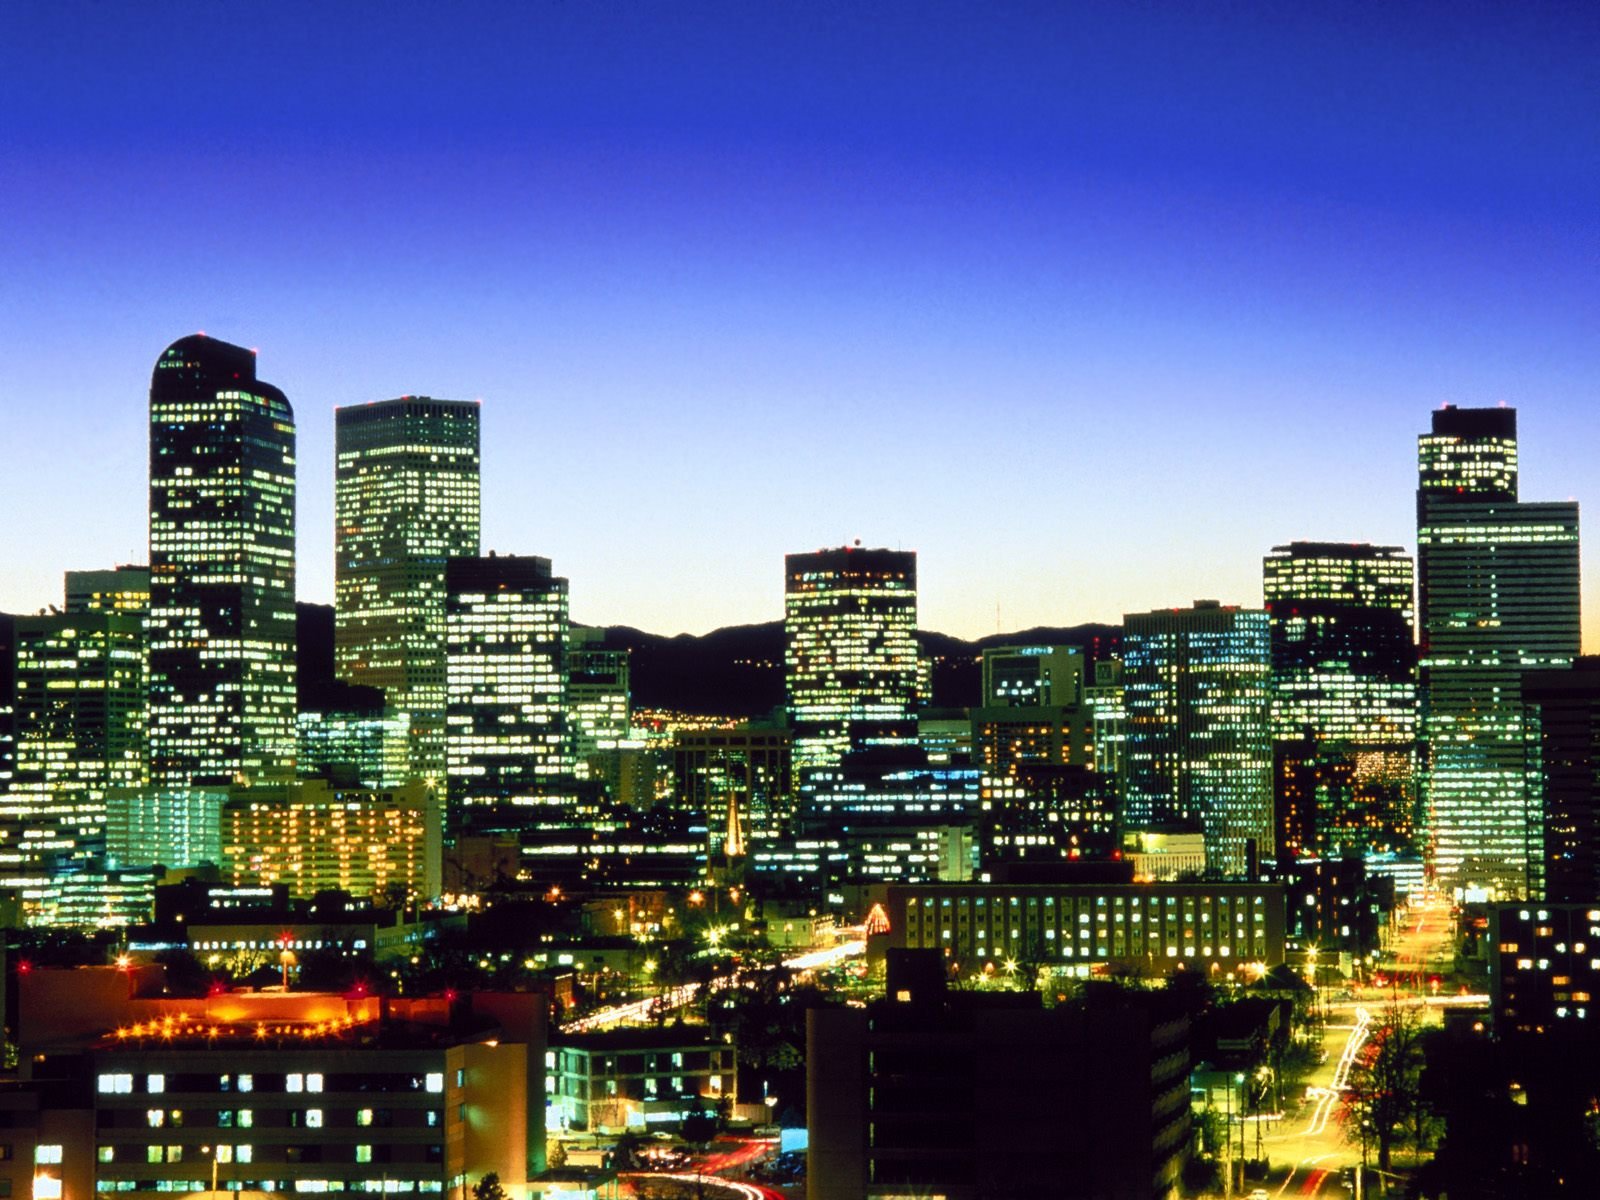 Mile High City Denver Colorado   HQ Free Wallpapers download 100